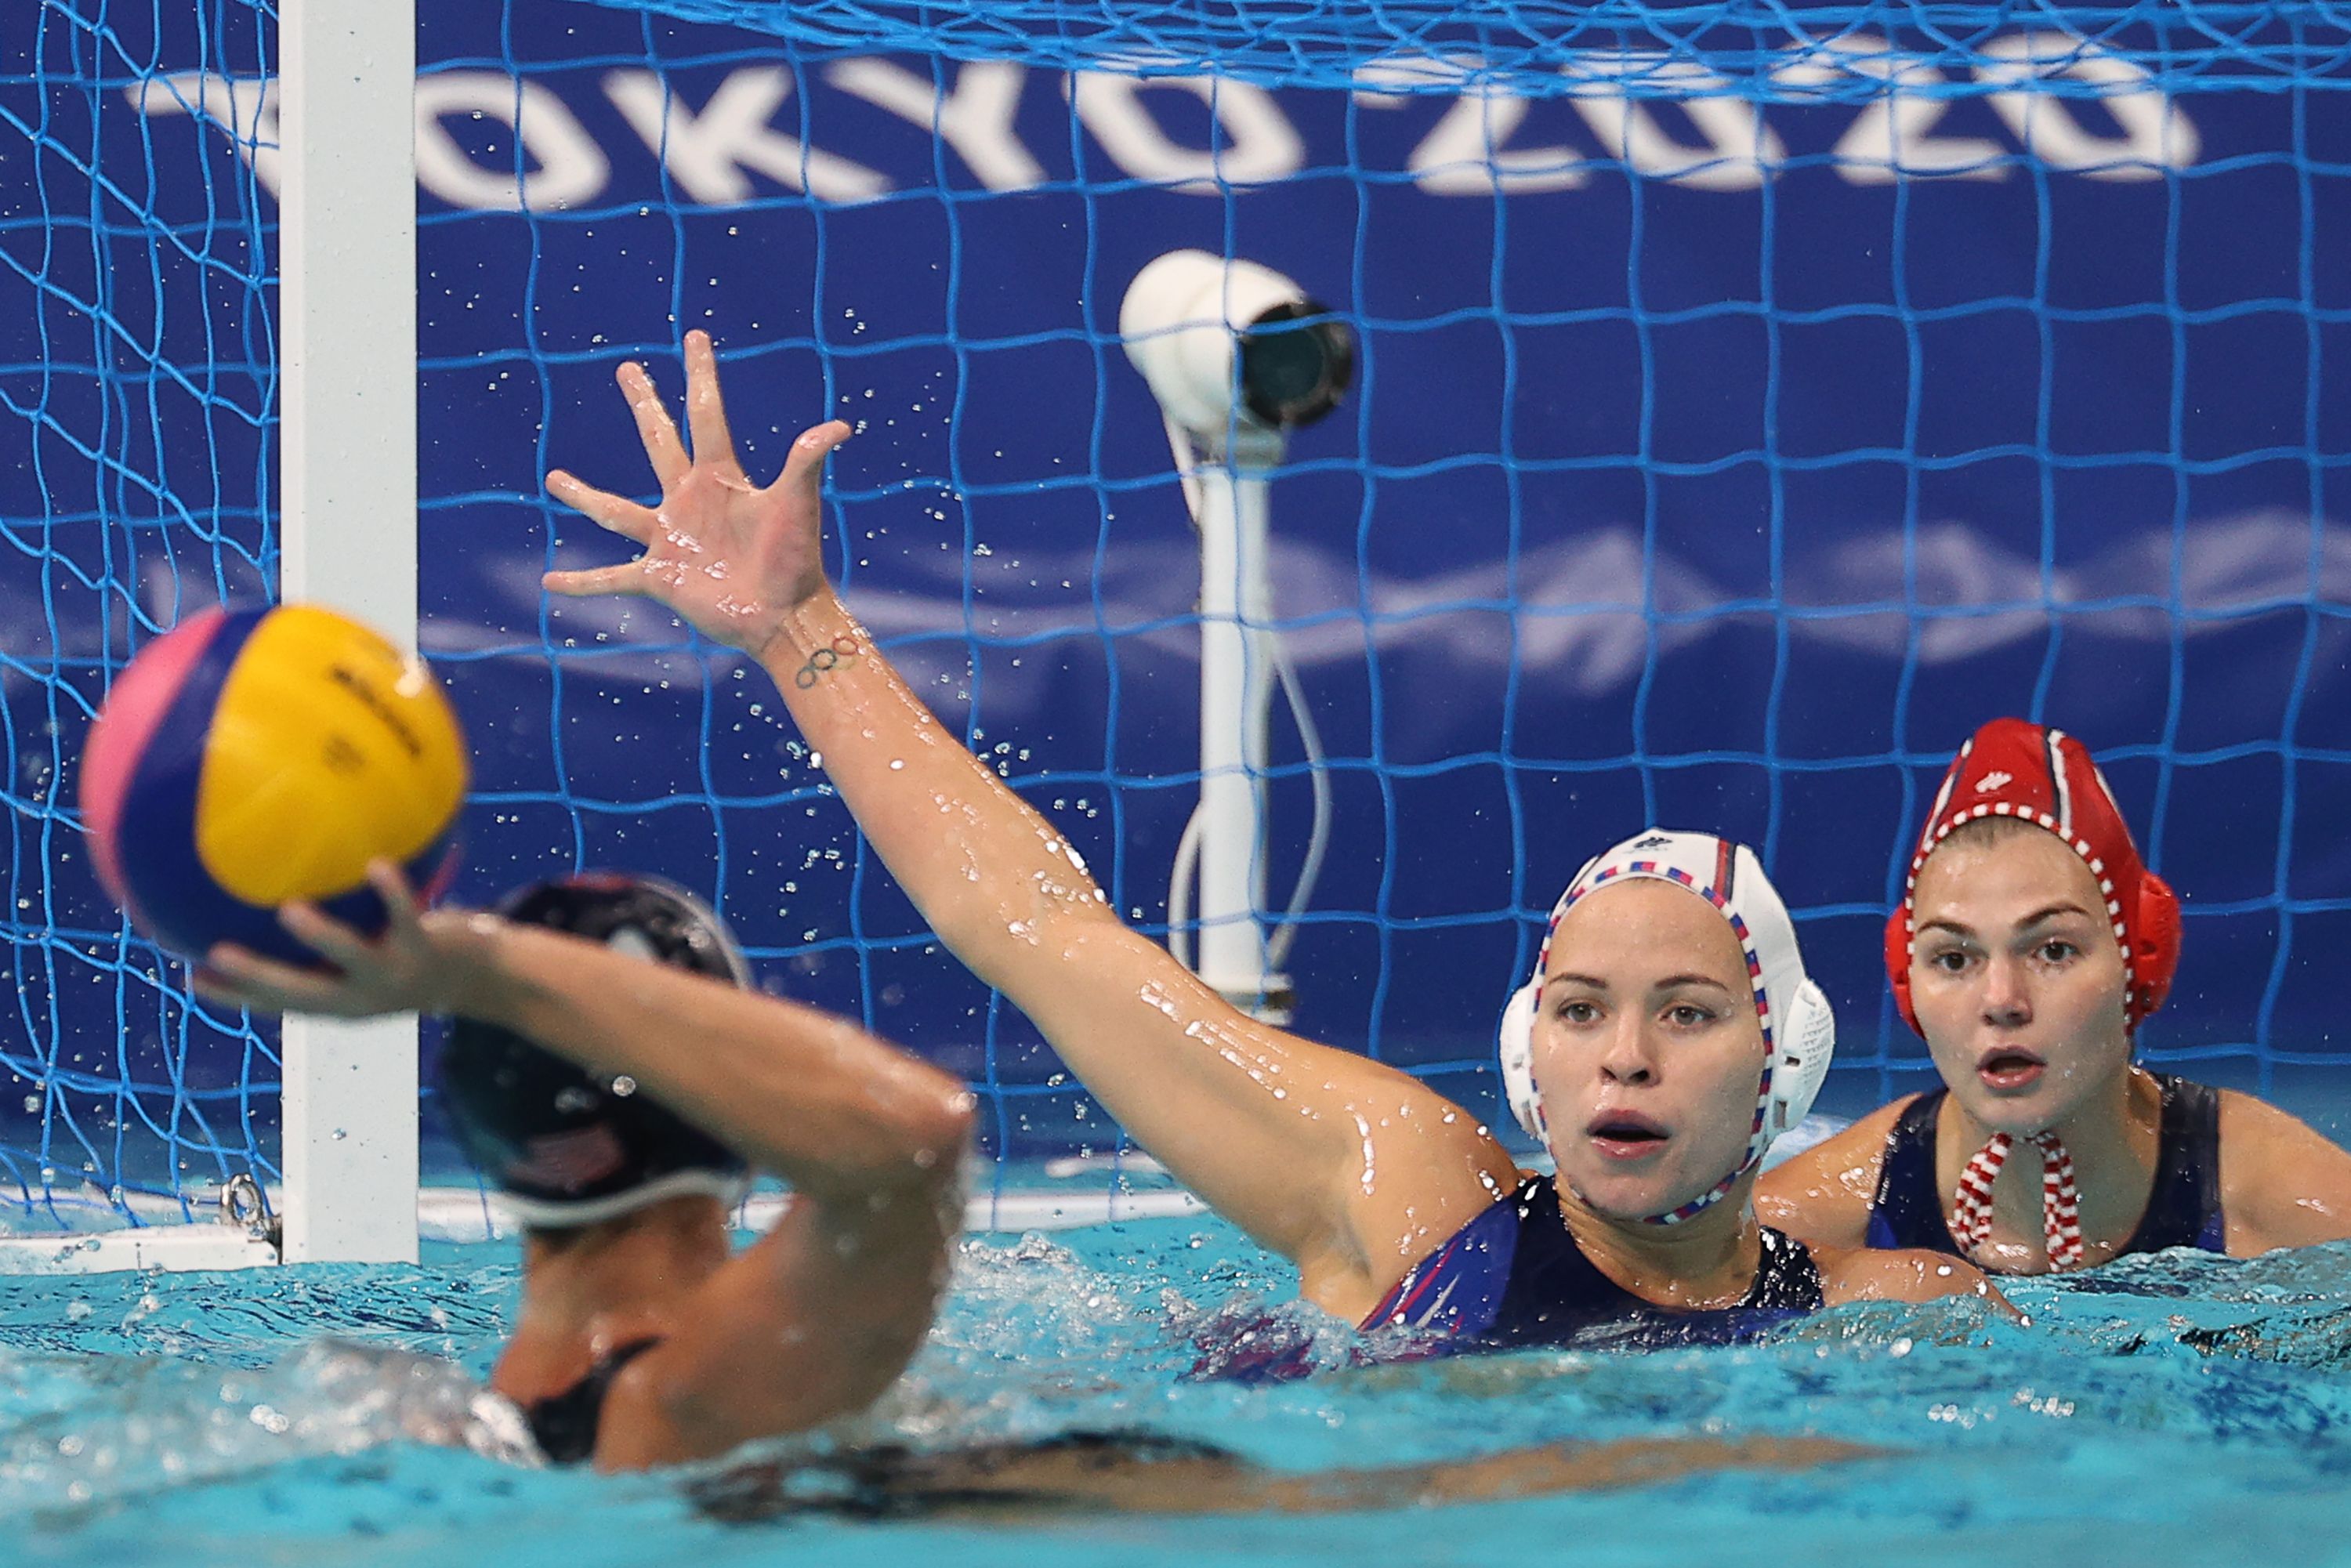 The USA's Madeline Musselman, ROC's Anna Timofeyeva and Anastasia Fedotova (L-R) in a womens semifinal water polo match at the Olympic Games, at Tatsumi Water Polo Centre.